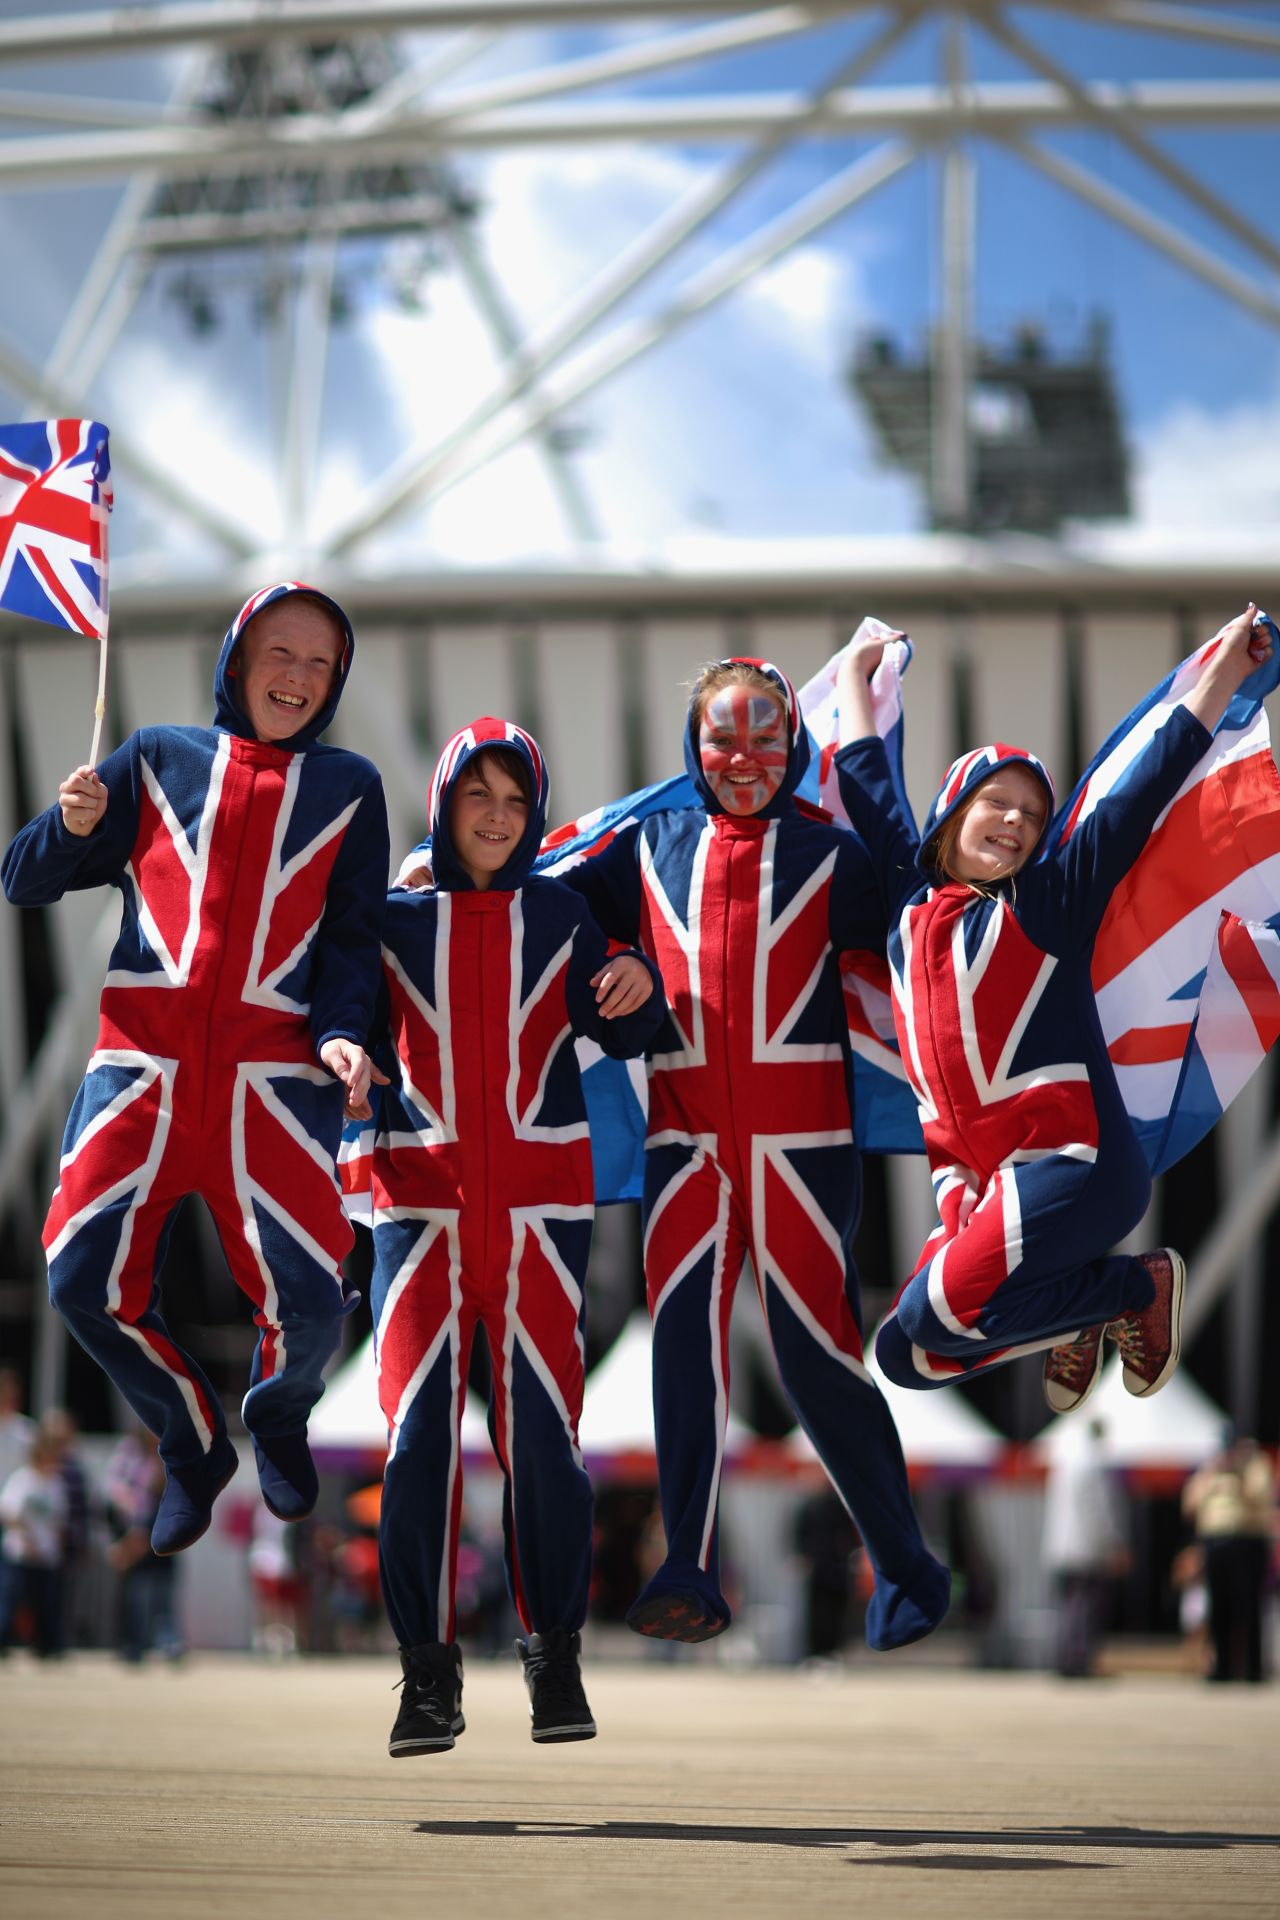 Brits hope the country's renewed optimism will be one of the lasting legacies of the Games.